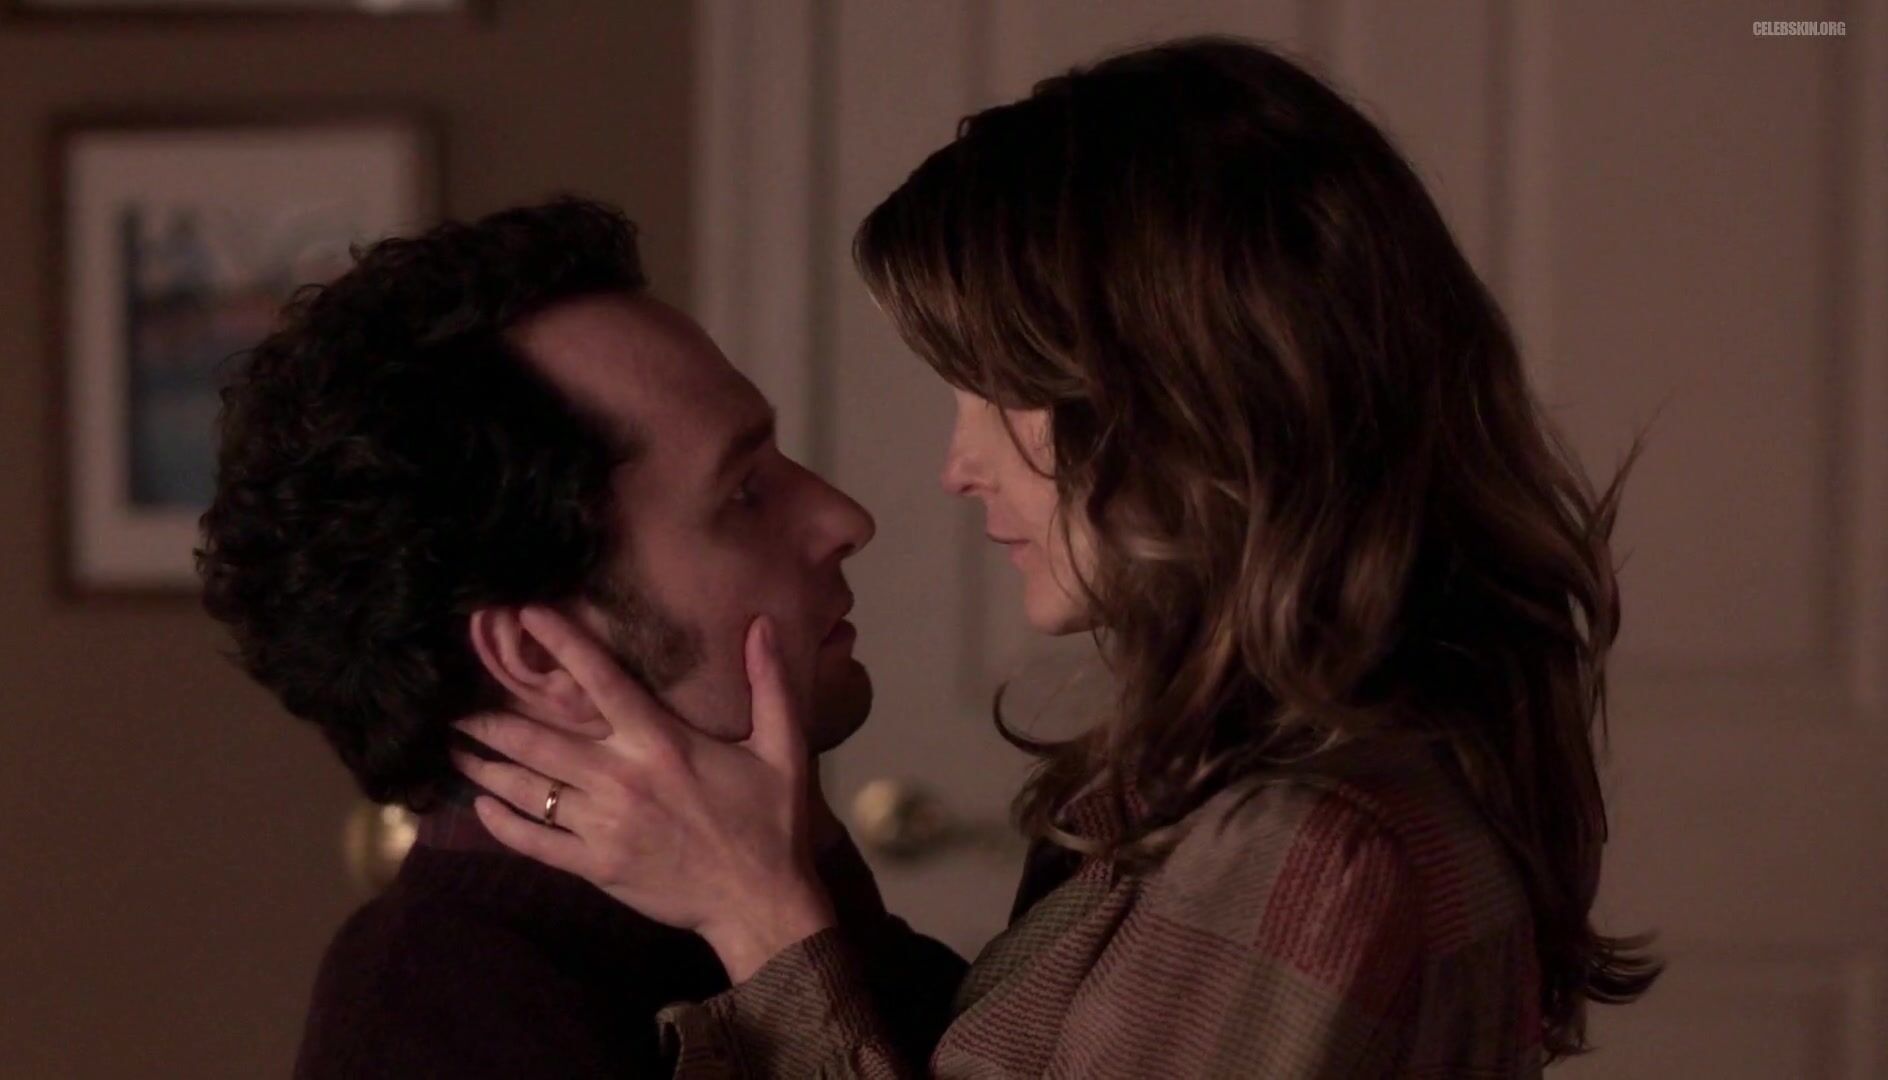 Sub Keri Russell looks hot-to-trot in explicit sex scene from The Americans S04E05 Clip